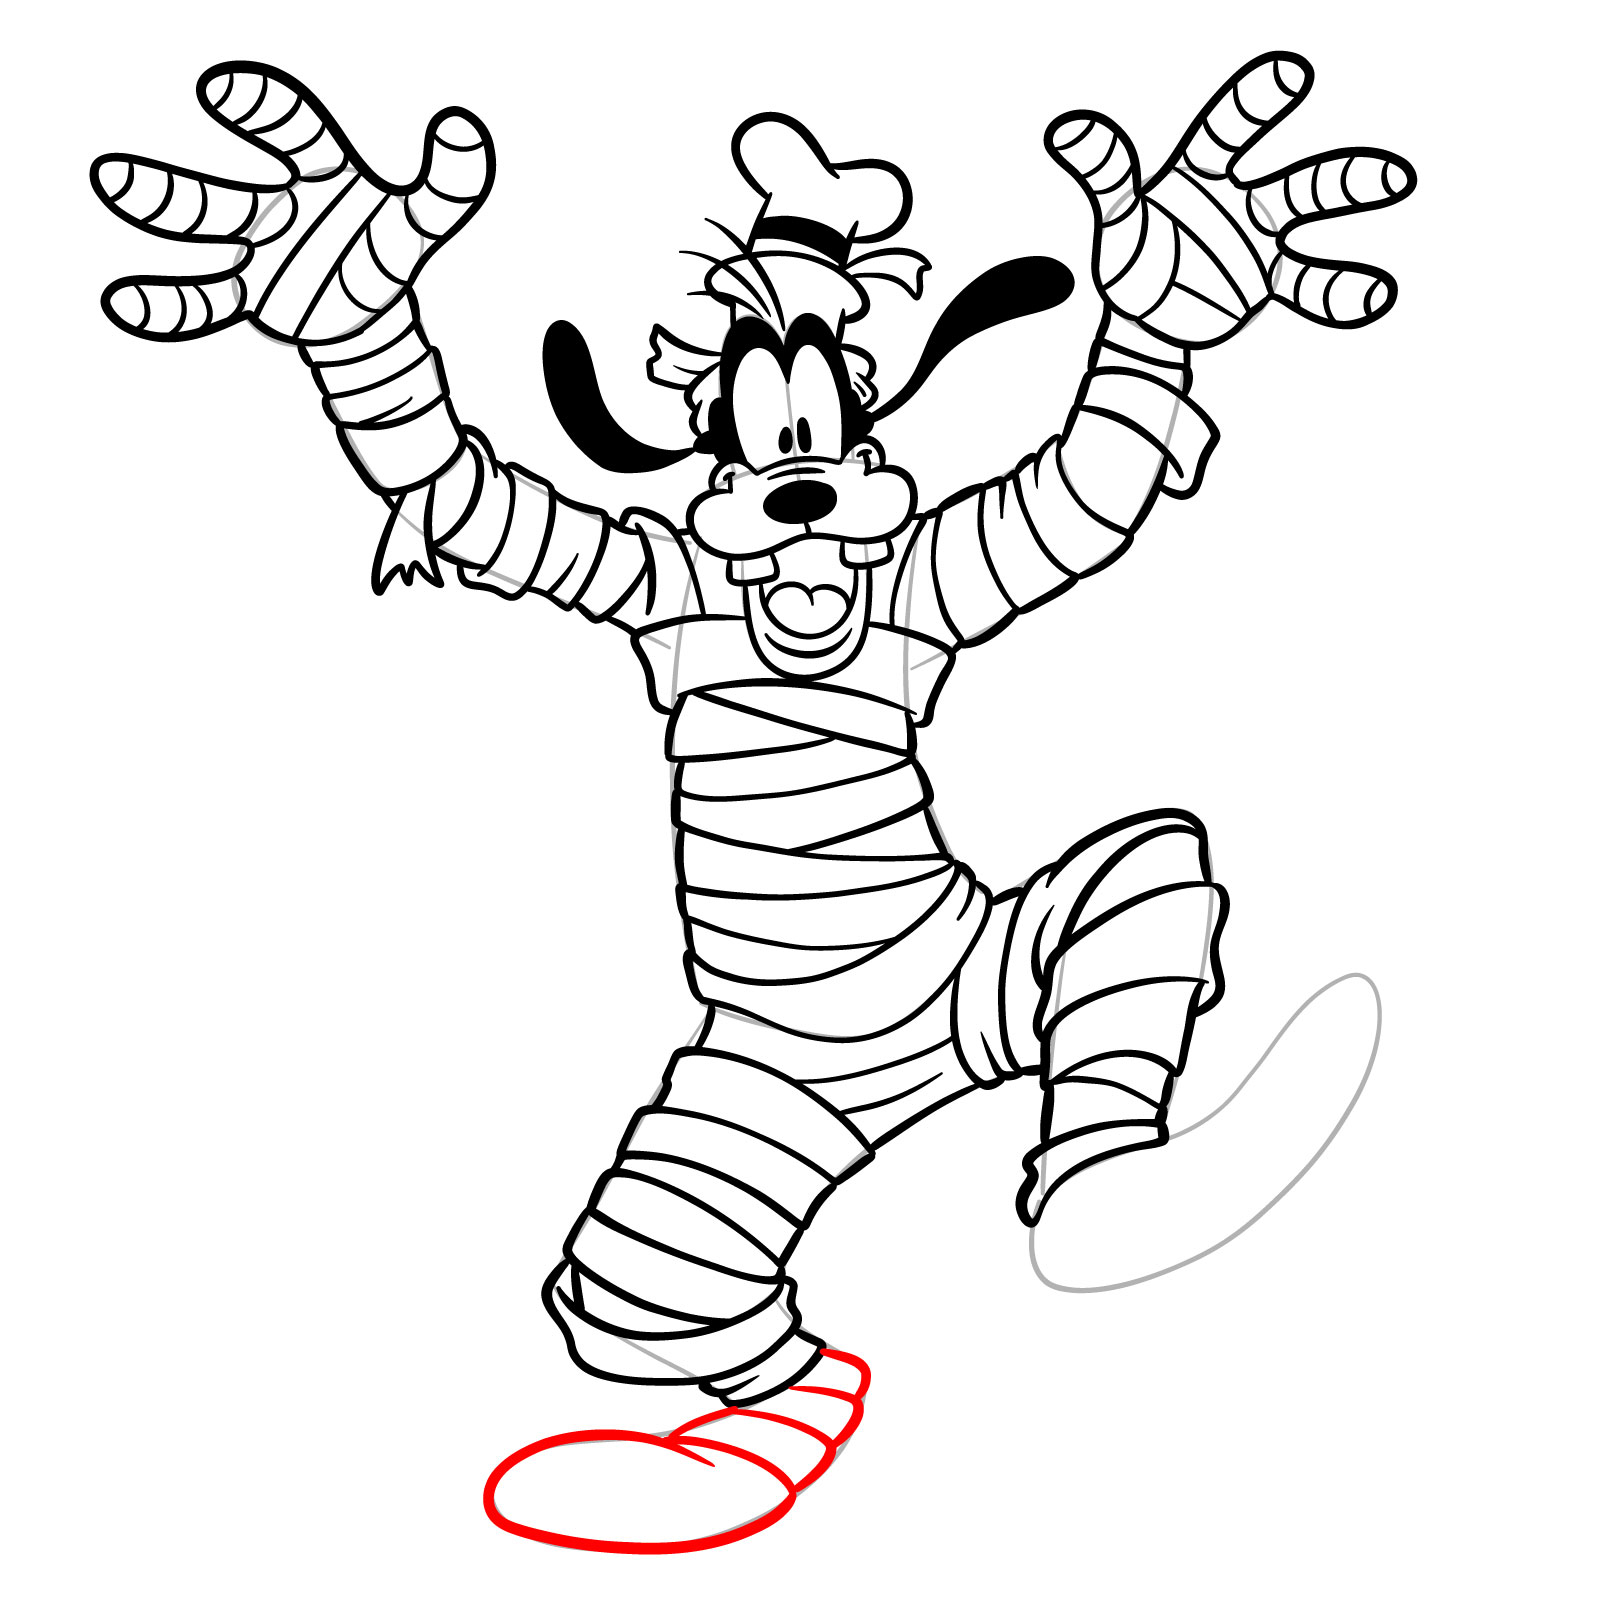 How to draw Halloween Goofy as a mummy - step 29